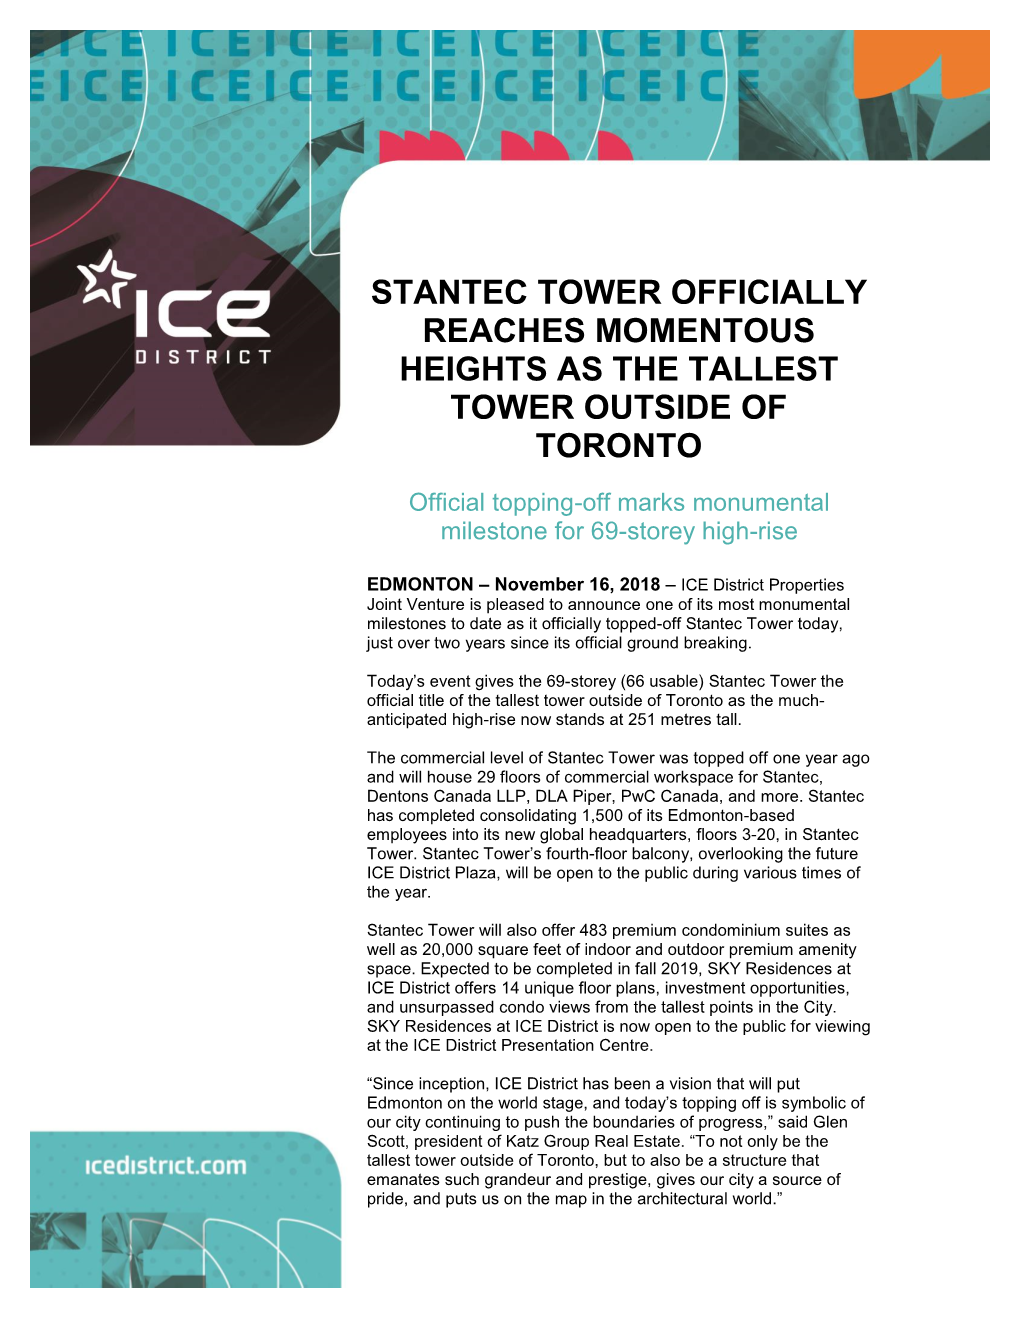 Stantec Tower Officially Reaches Momentous Heights As the Tallest Tower Outside of Toronto